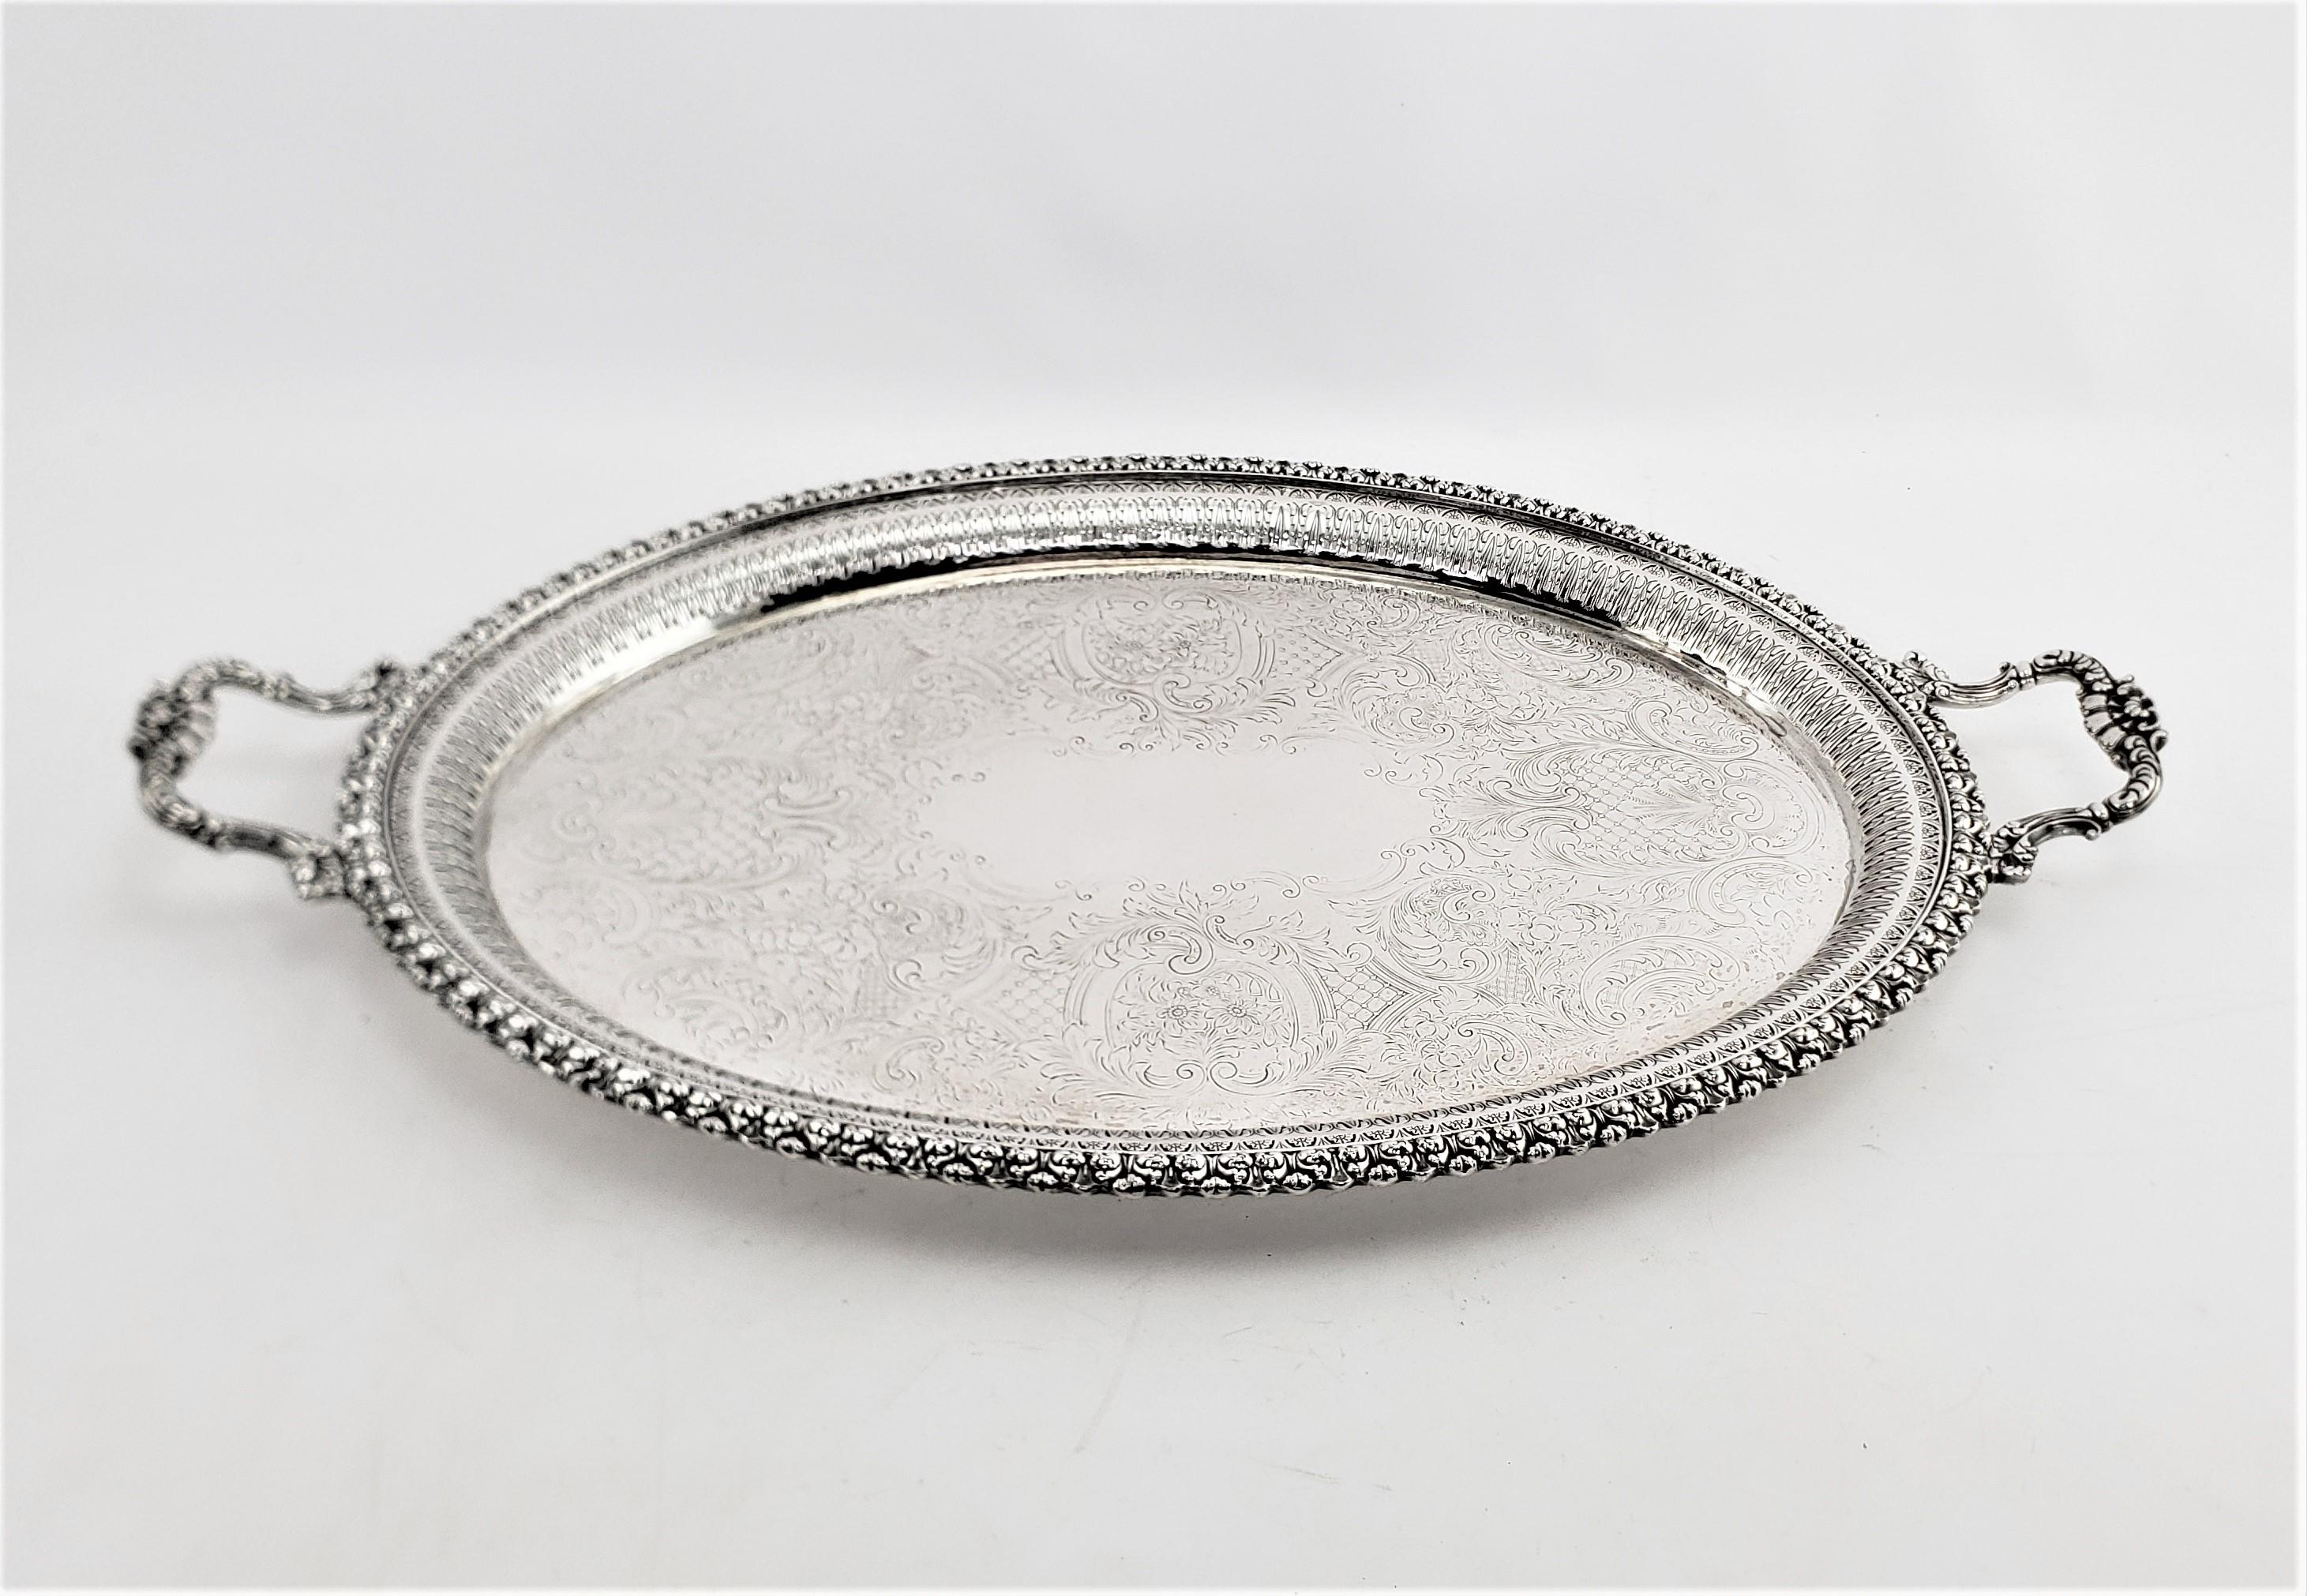 This antique silver plated serving tray was made by the renowned Barker-Ellis Silver Company of England, and dates to approximately 1920 and done in a Victorian style. This oval tray. The outer edge of the tray is done with an ornate stylized leaves